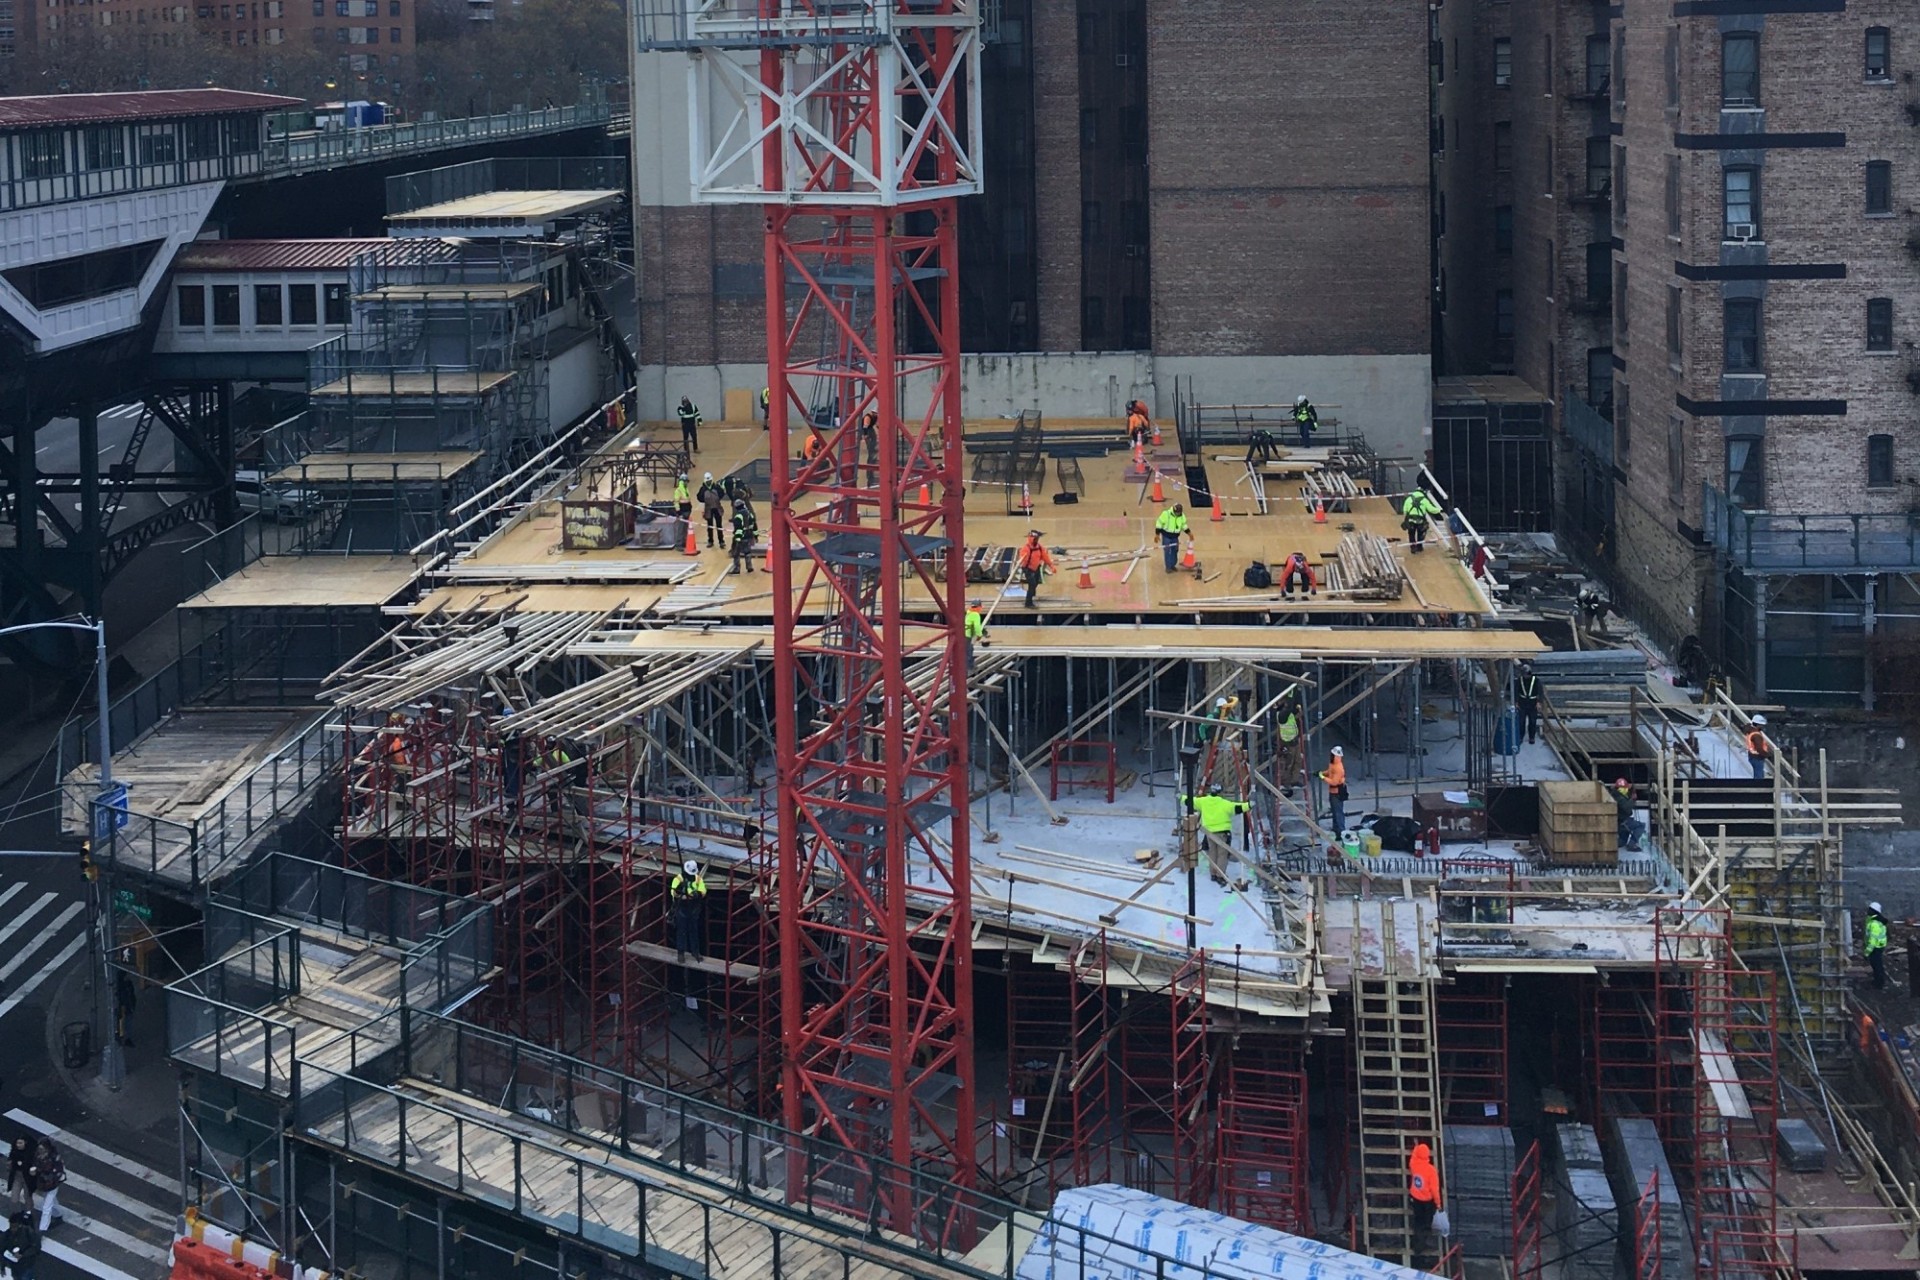 An aerial view of the 600 W. 125th Street construction site from the Forum, with a large red crane on the site.